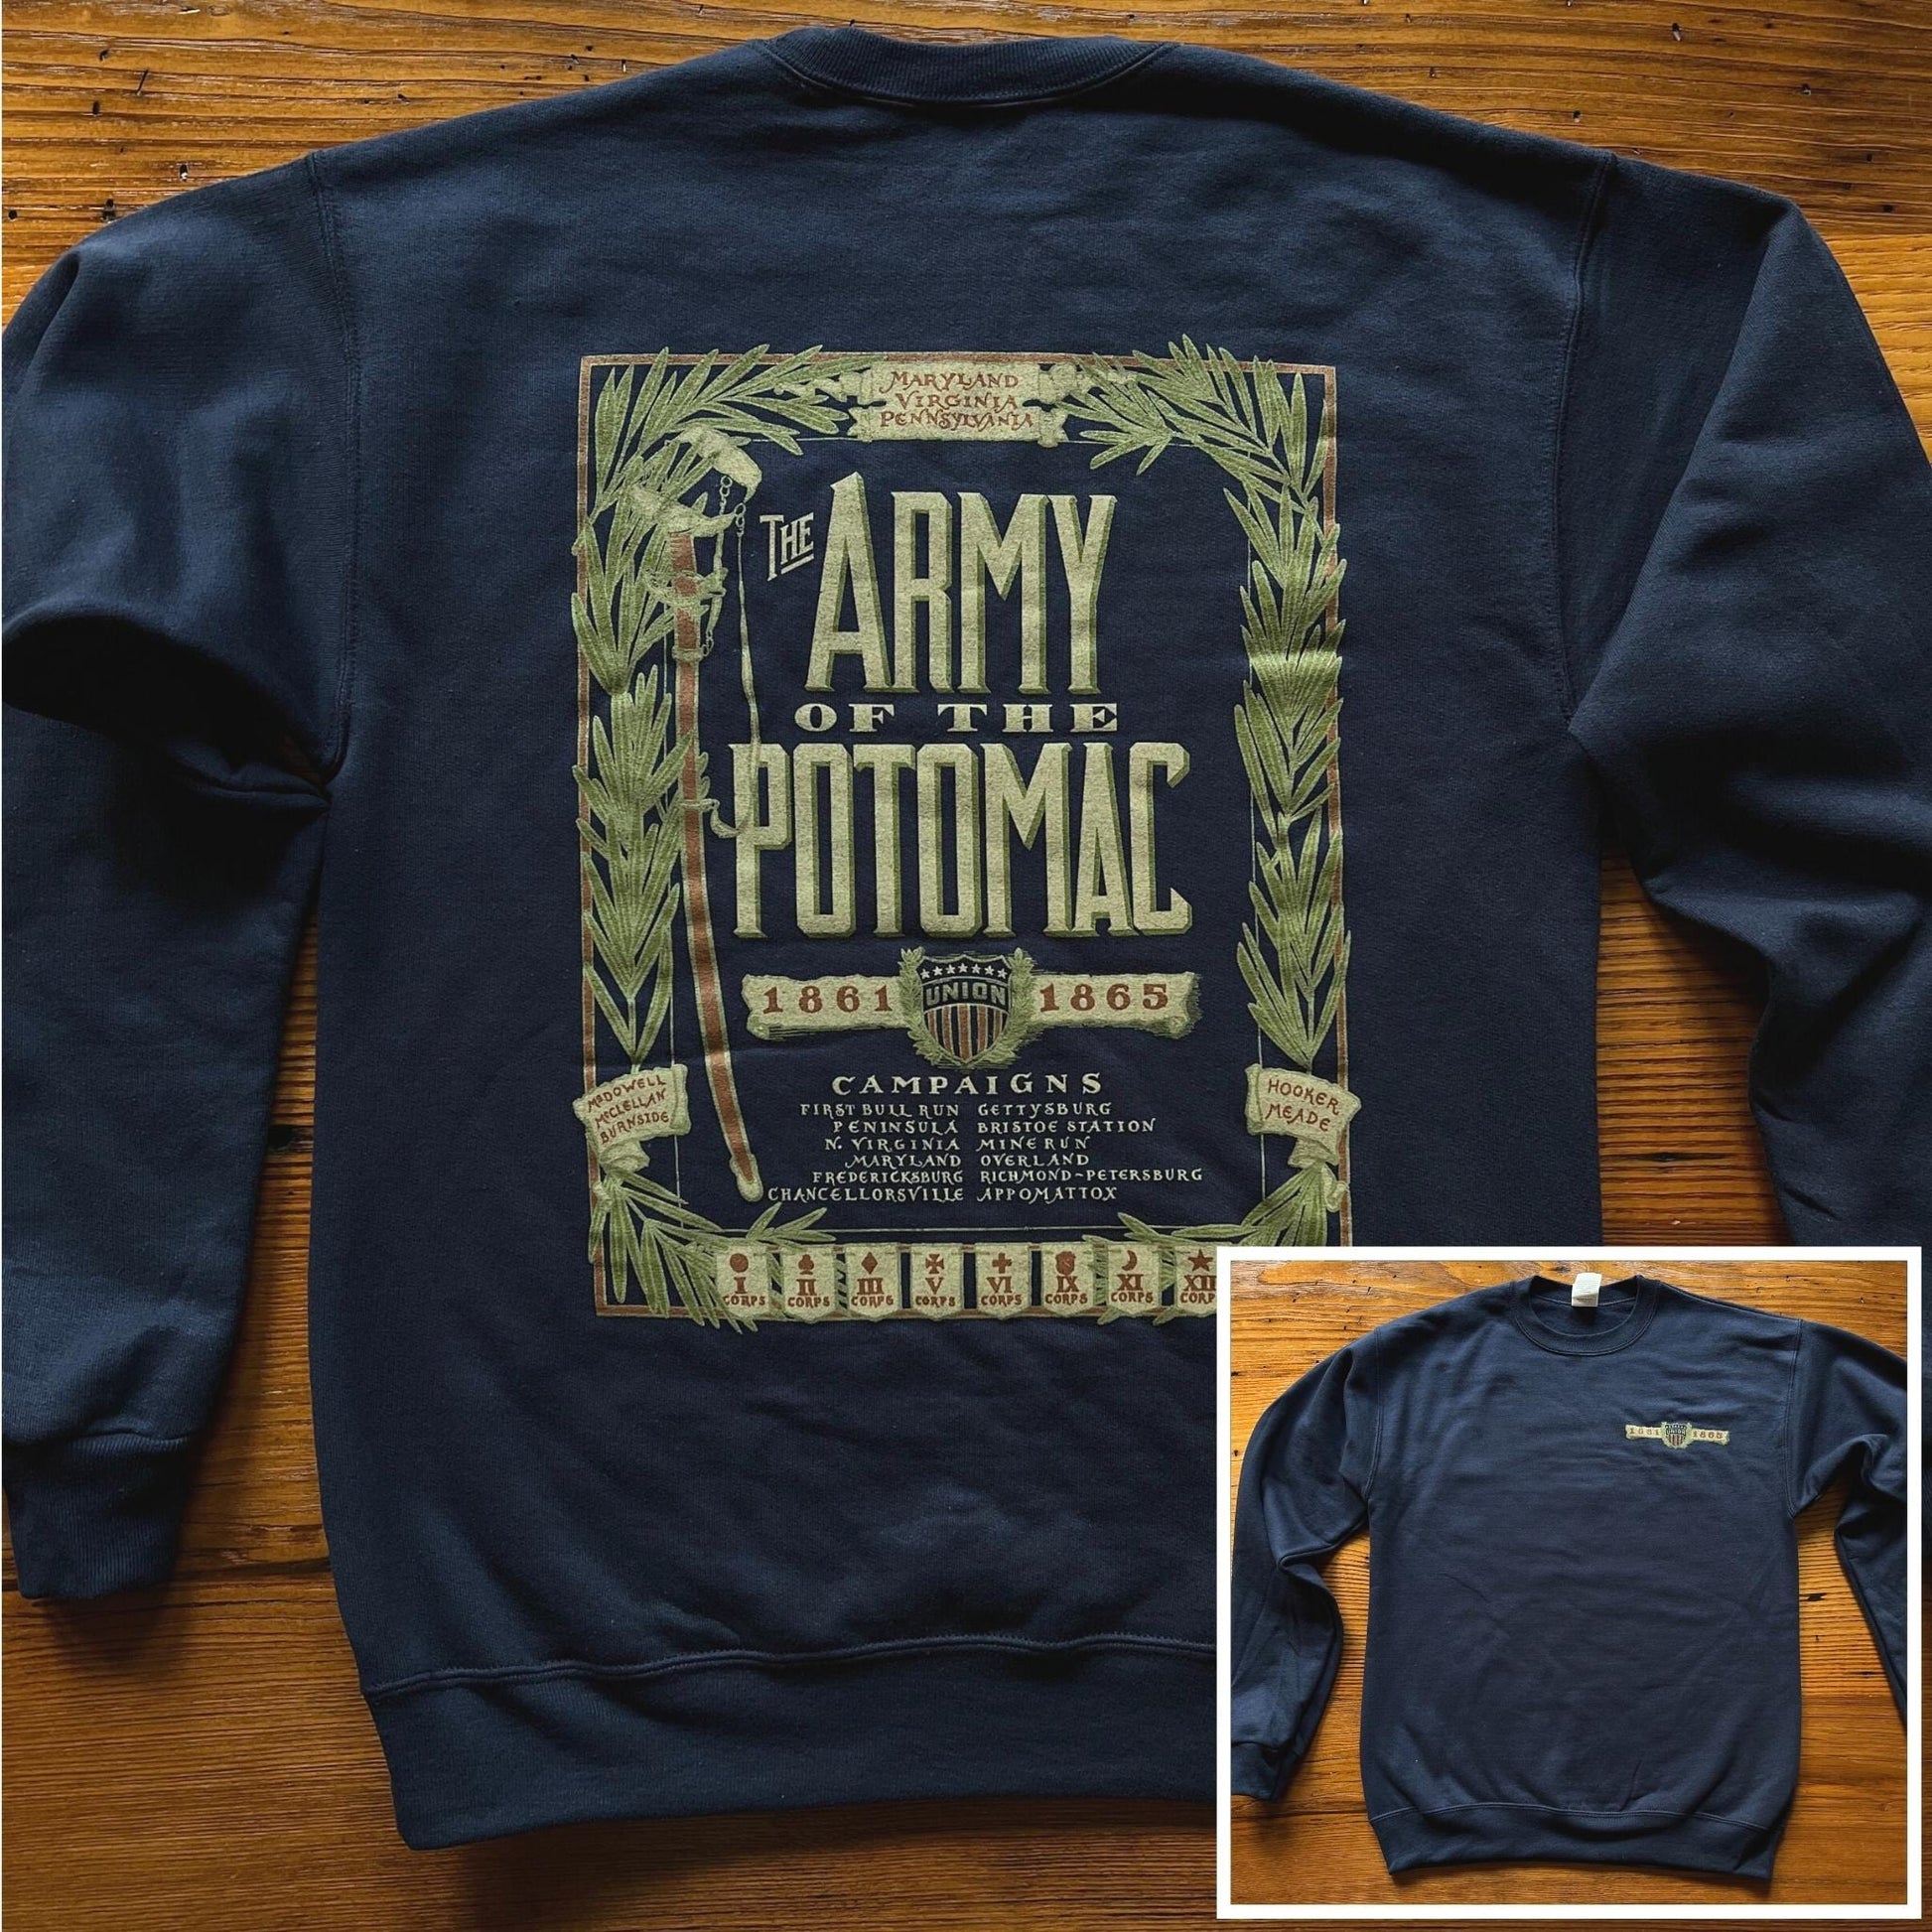 "The Army of the Potomac" Crewneck sweatshirt from The History List store